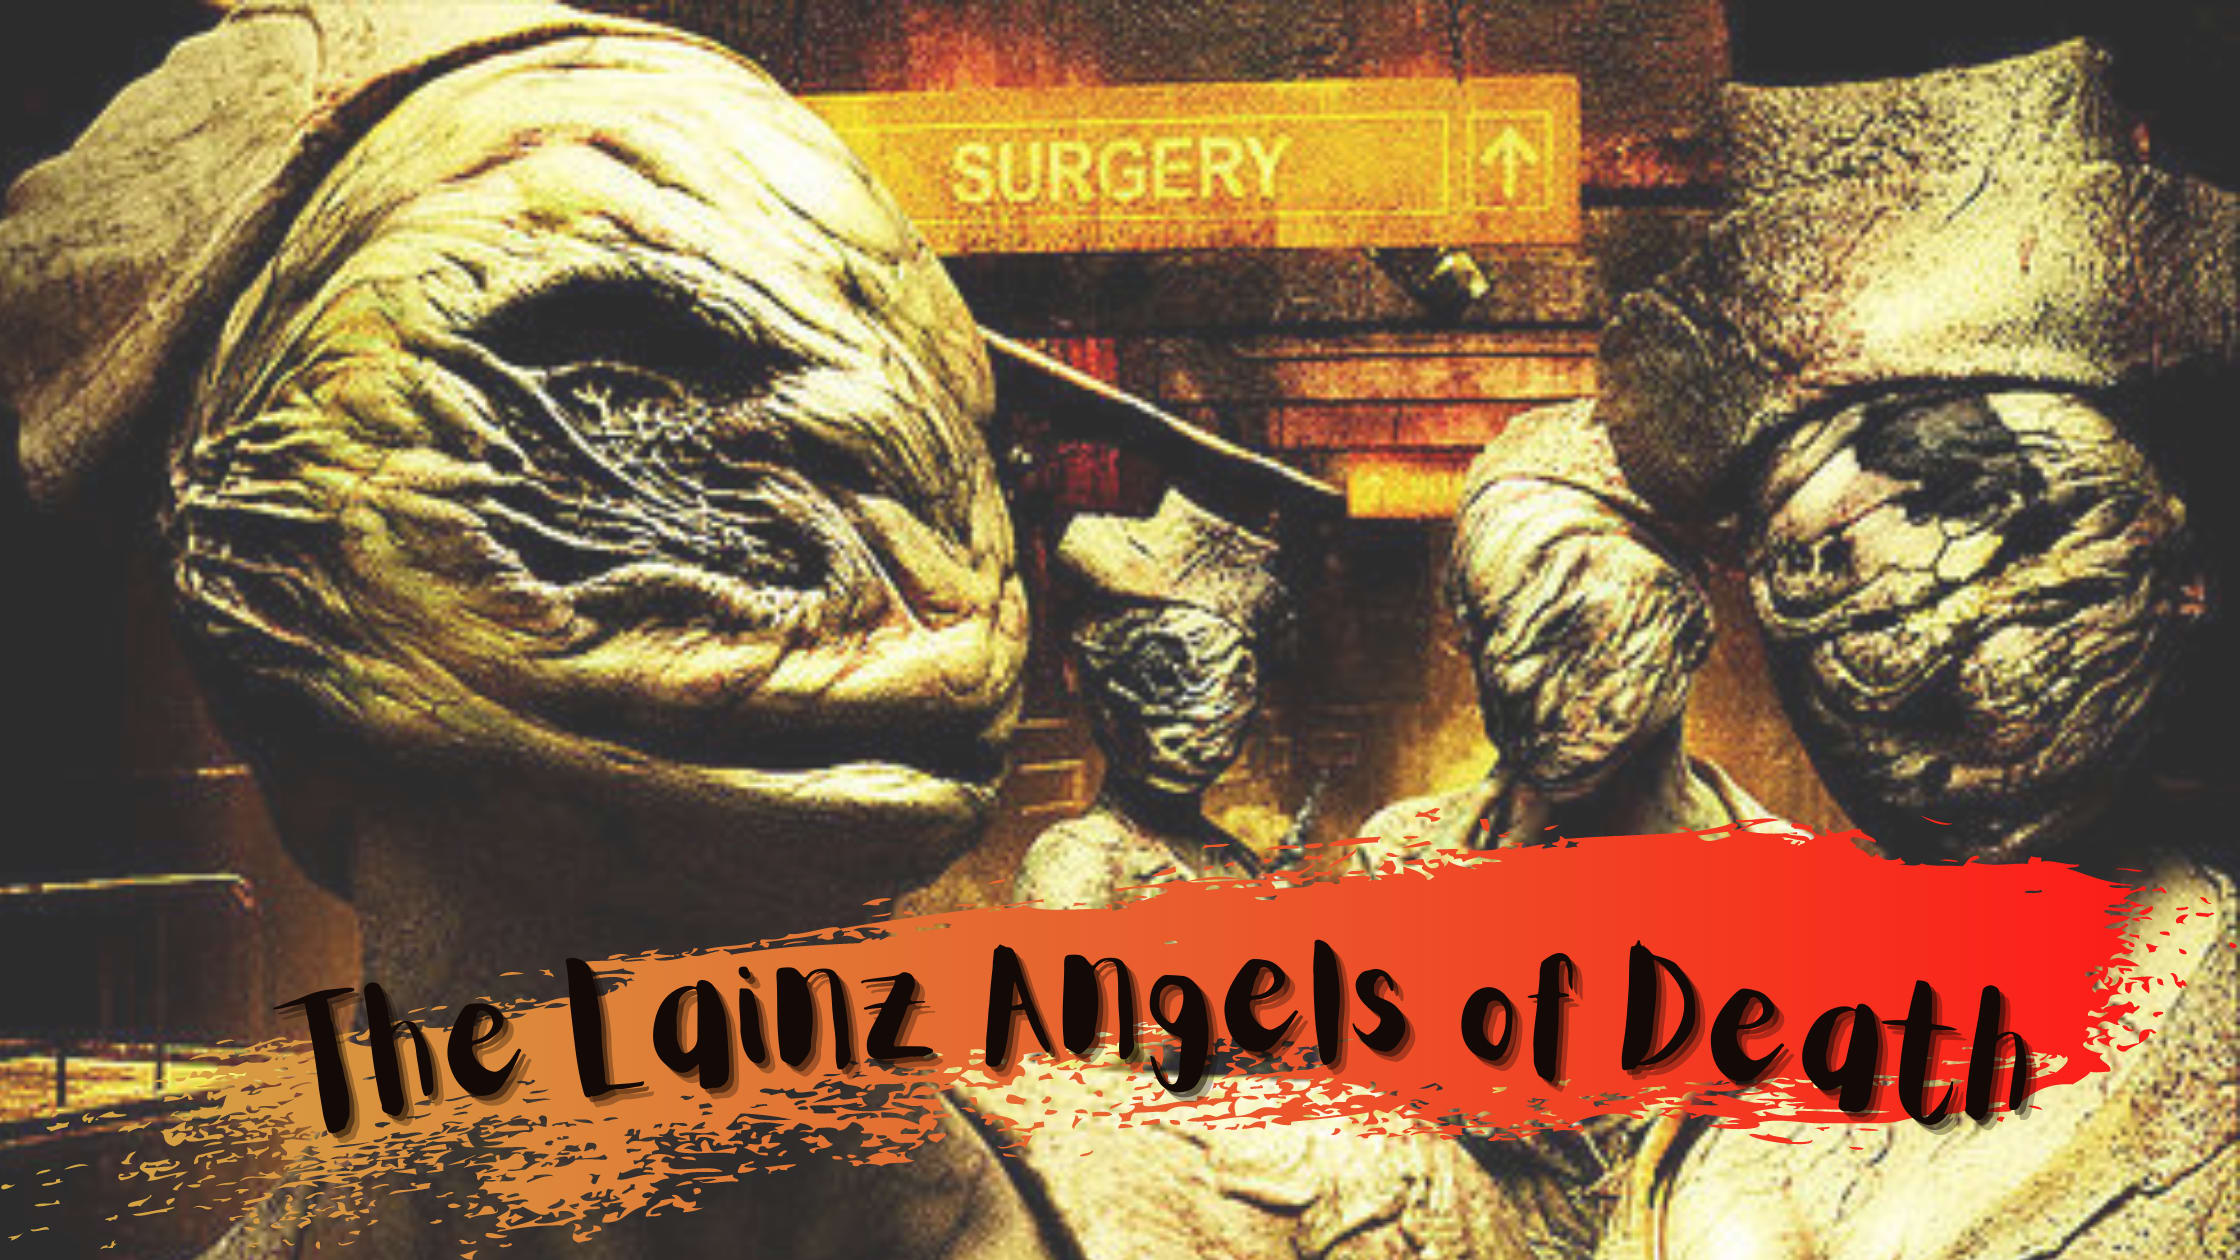 Lainz Angels of Death - 2 Girls One Crime (podcast)